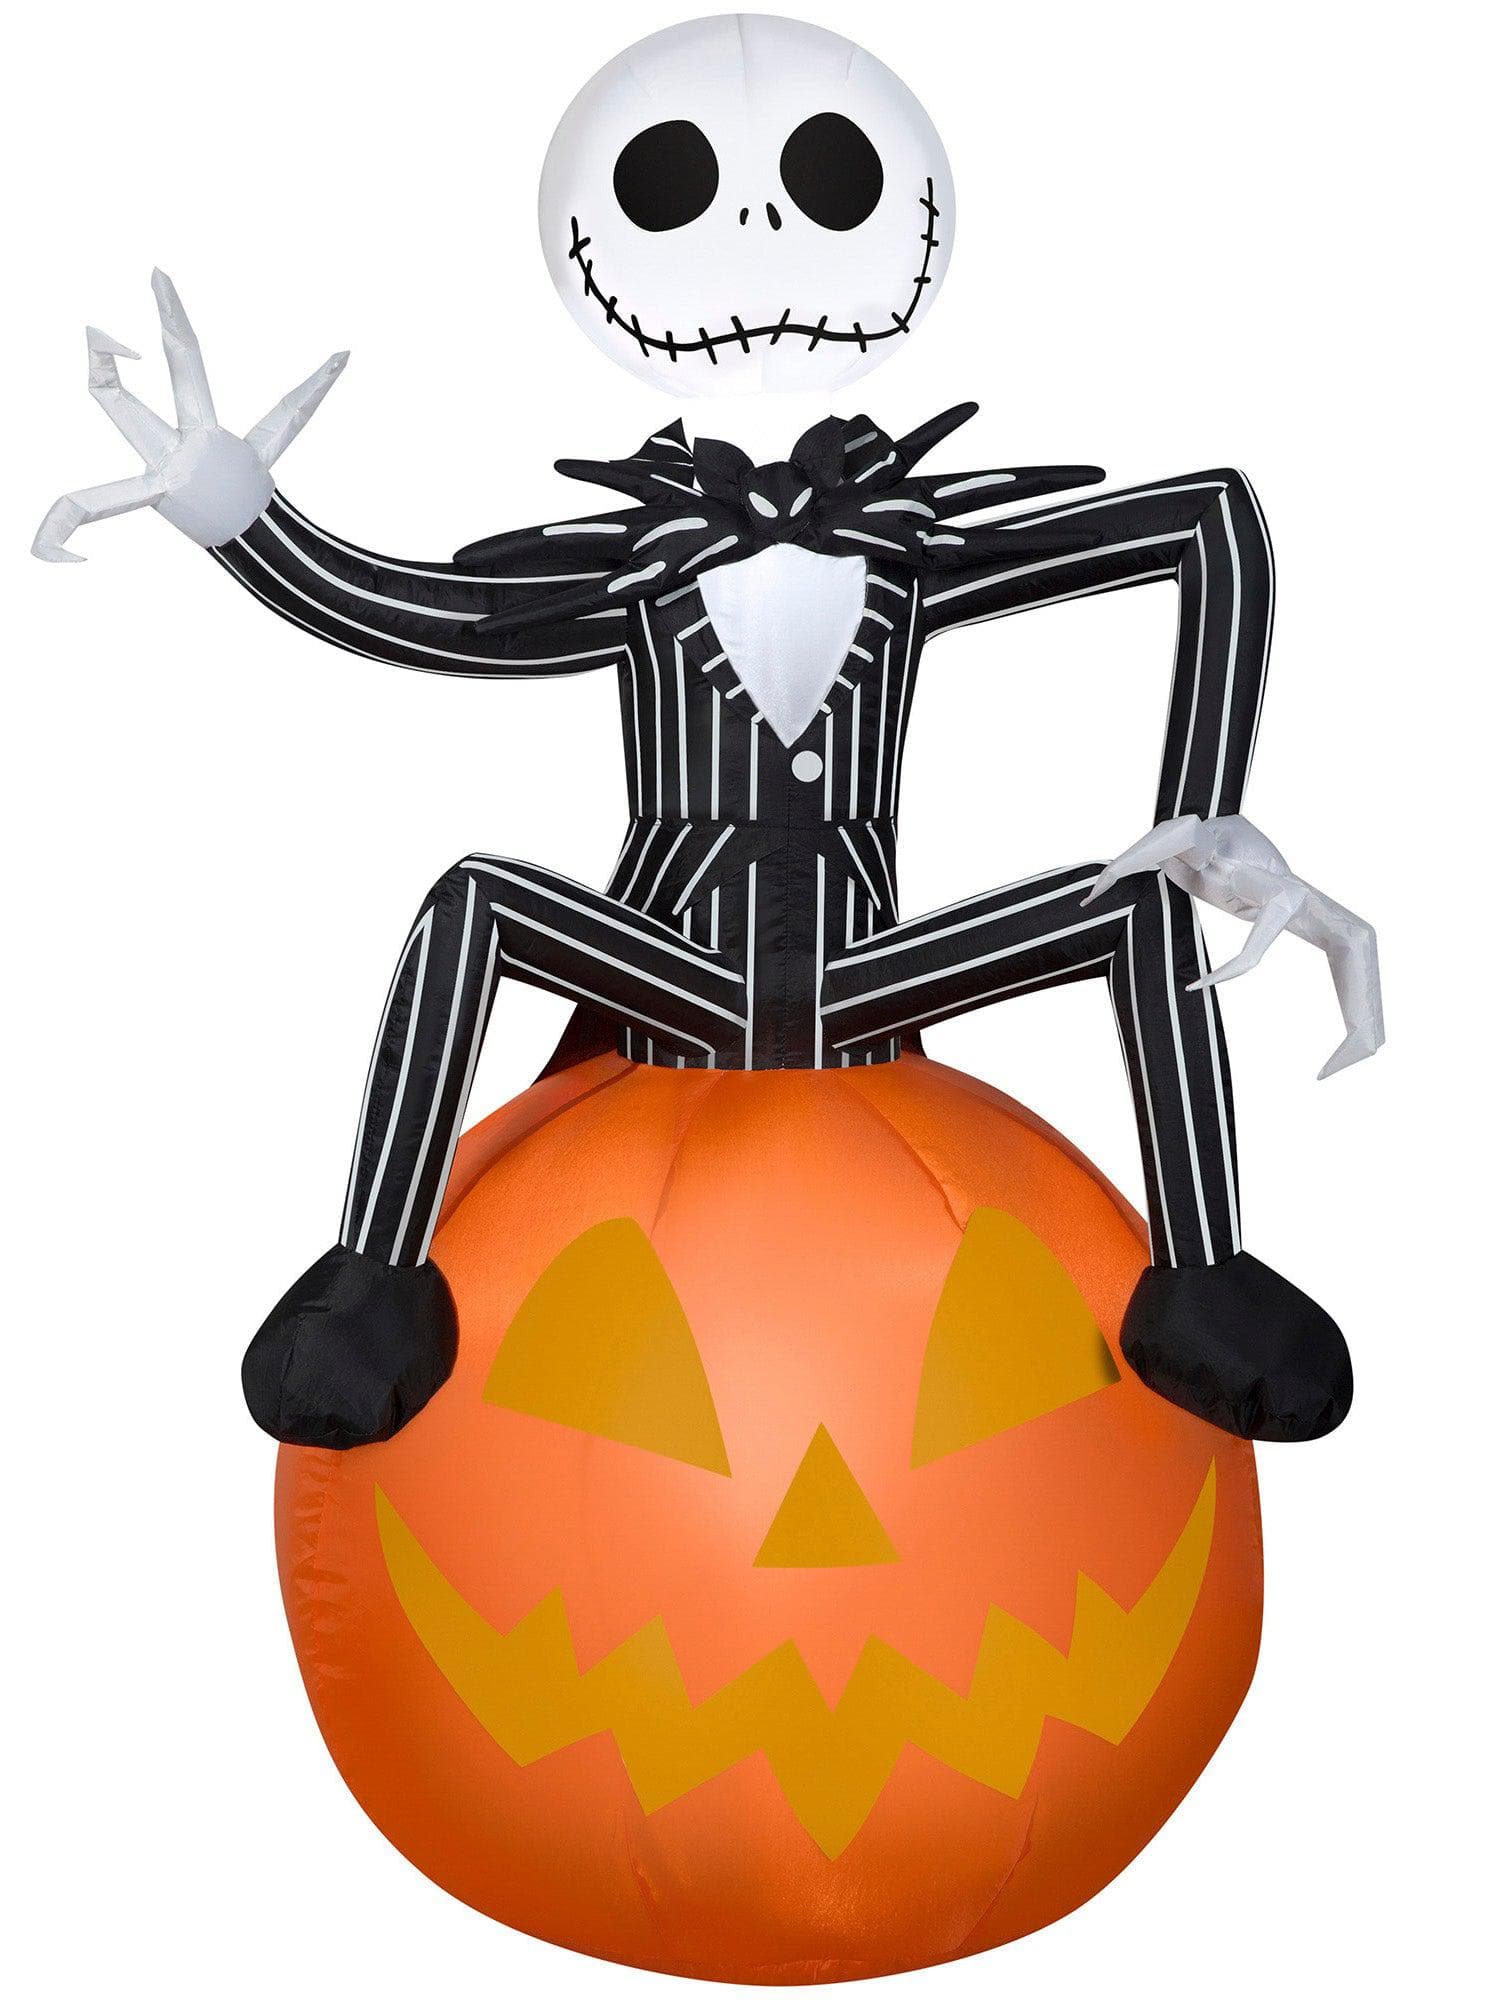 3.5 Foot The Nightmare Before Christmas Jack Skellington's Pumpkin Light Up Halloween Inflatable Lawn Decor - costumes.com